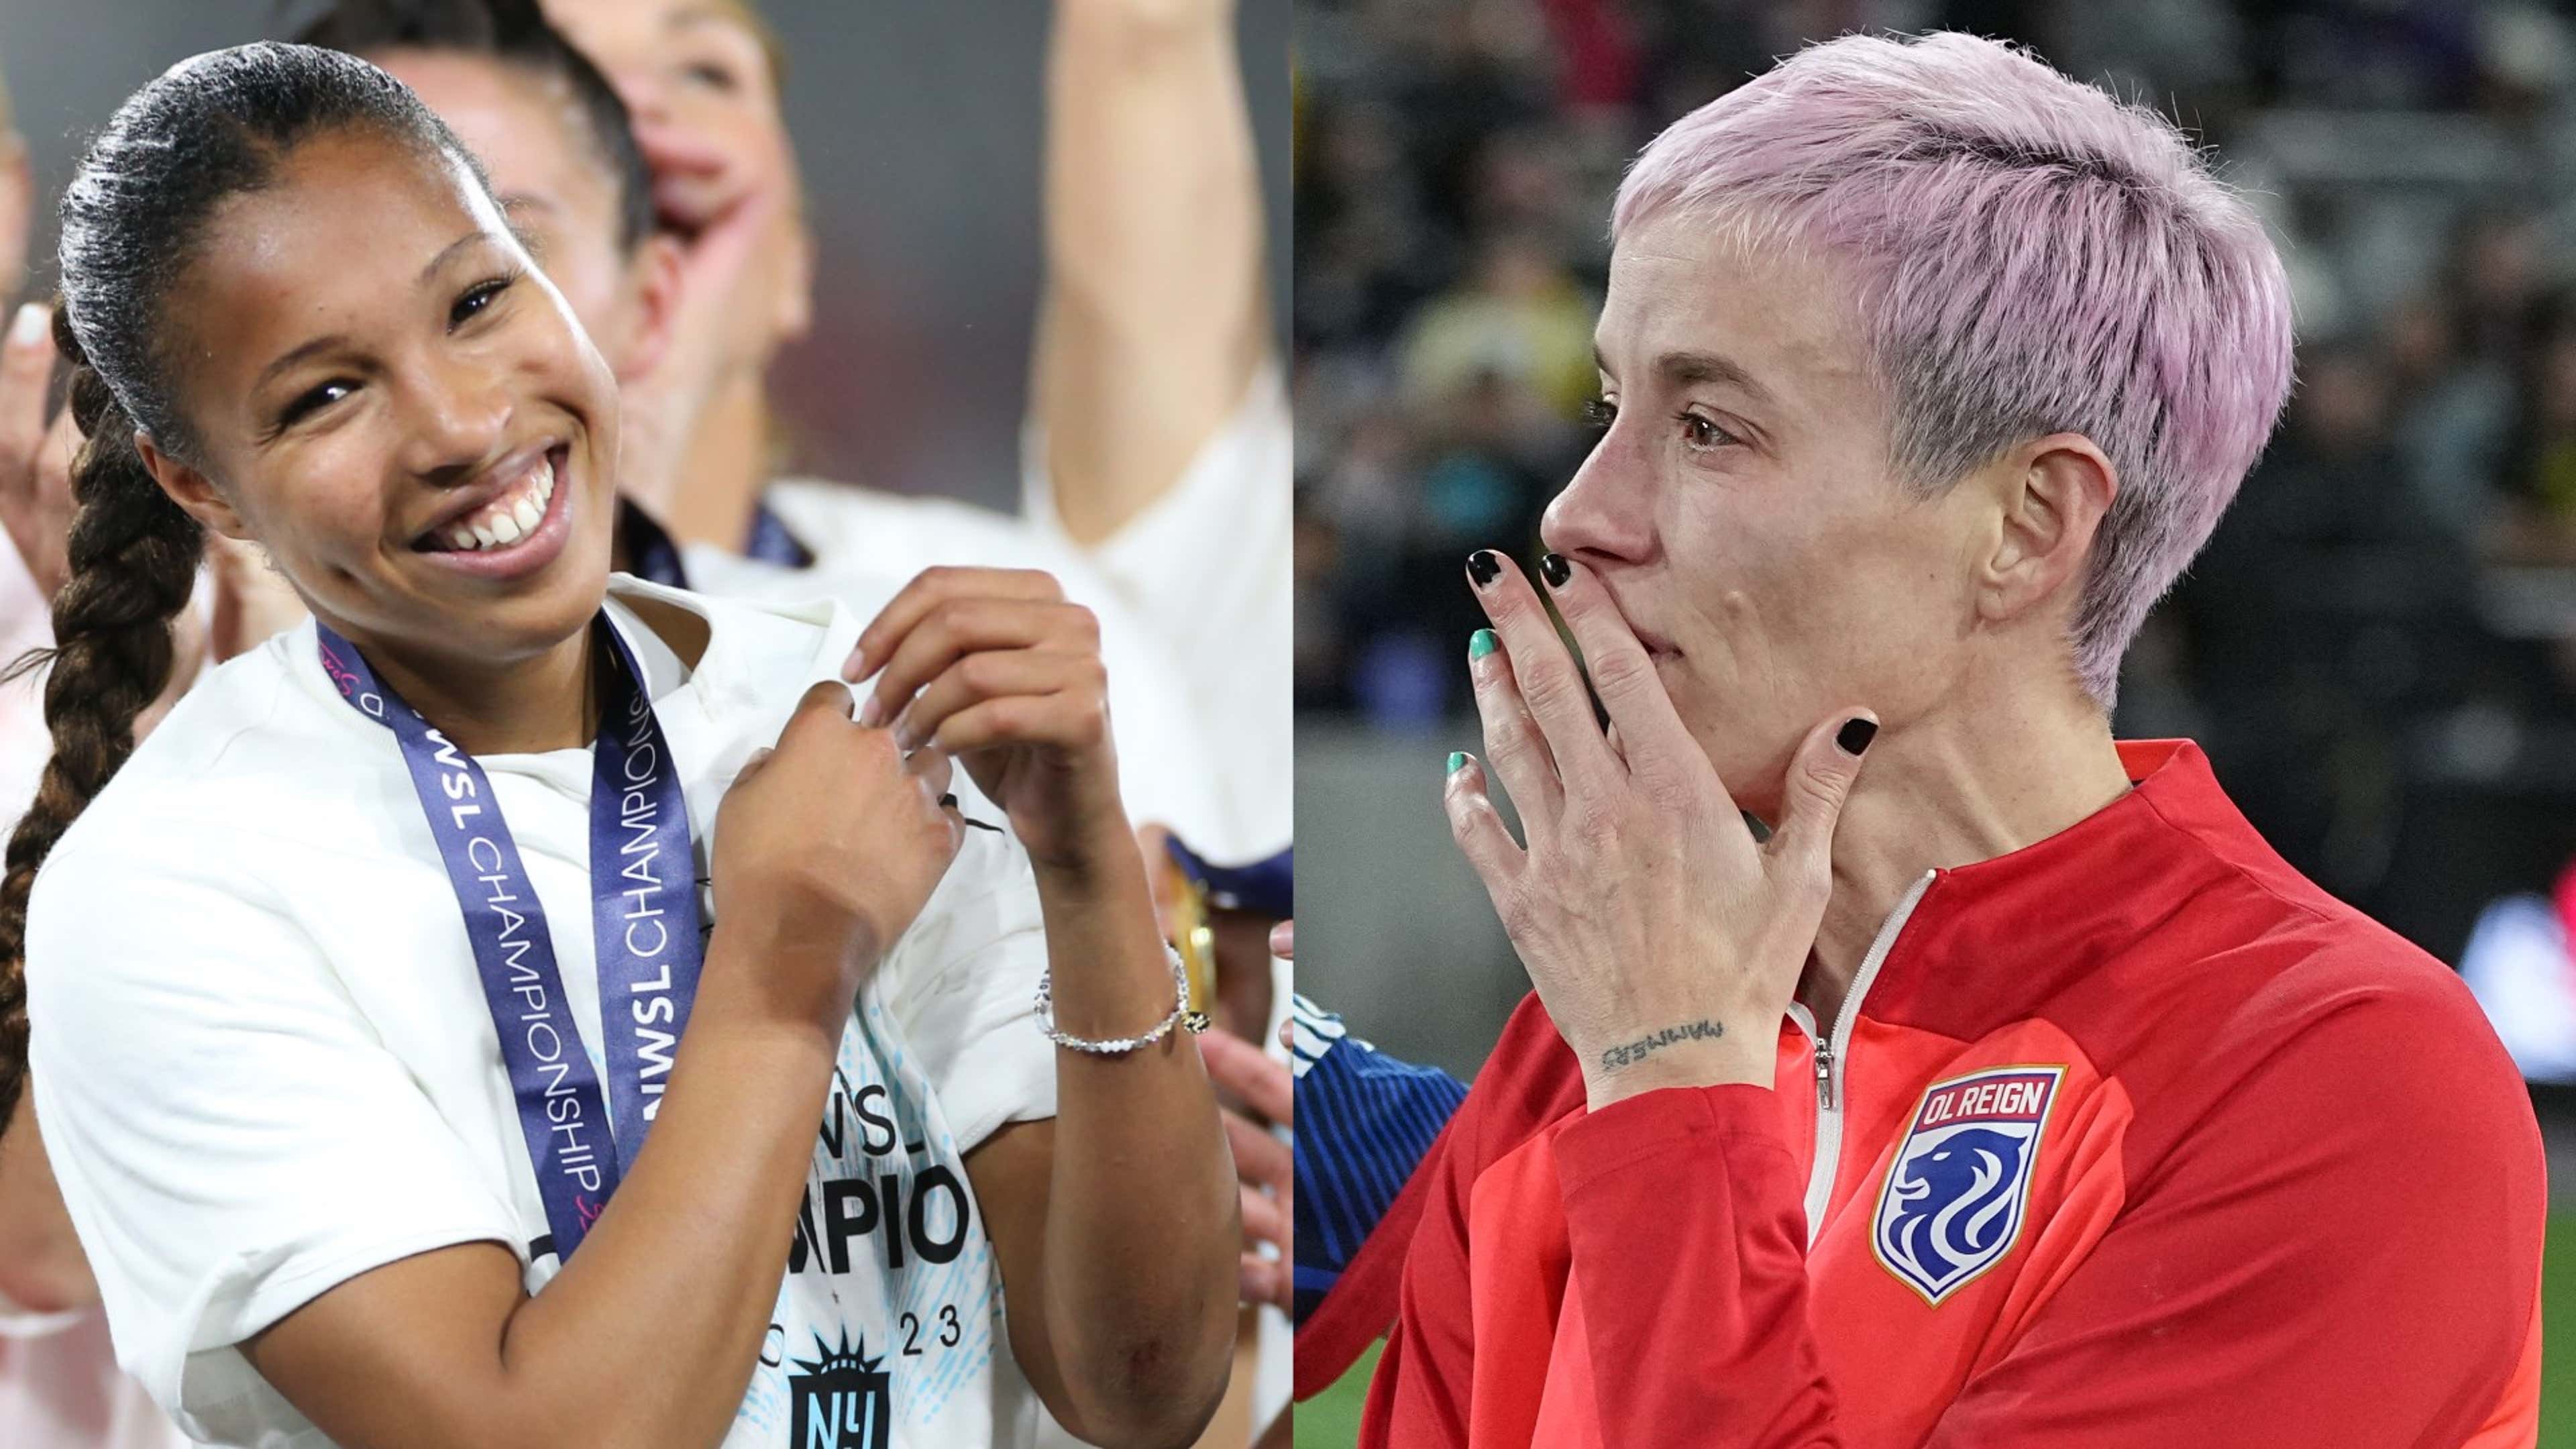 Gotham FC are NWSL Champions! Winners and losers as USWNT legend Megan  Rapinoe retires injured while Midge Purce rises to occasion